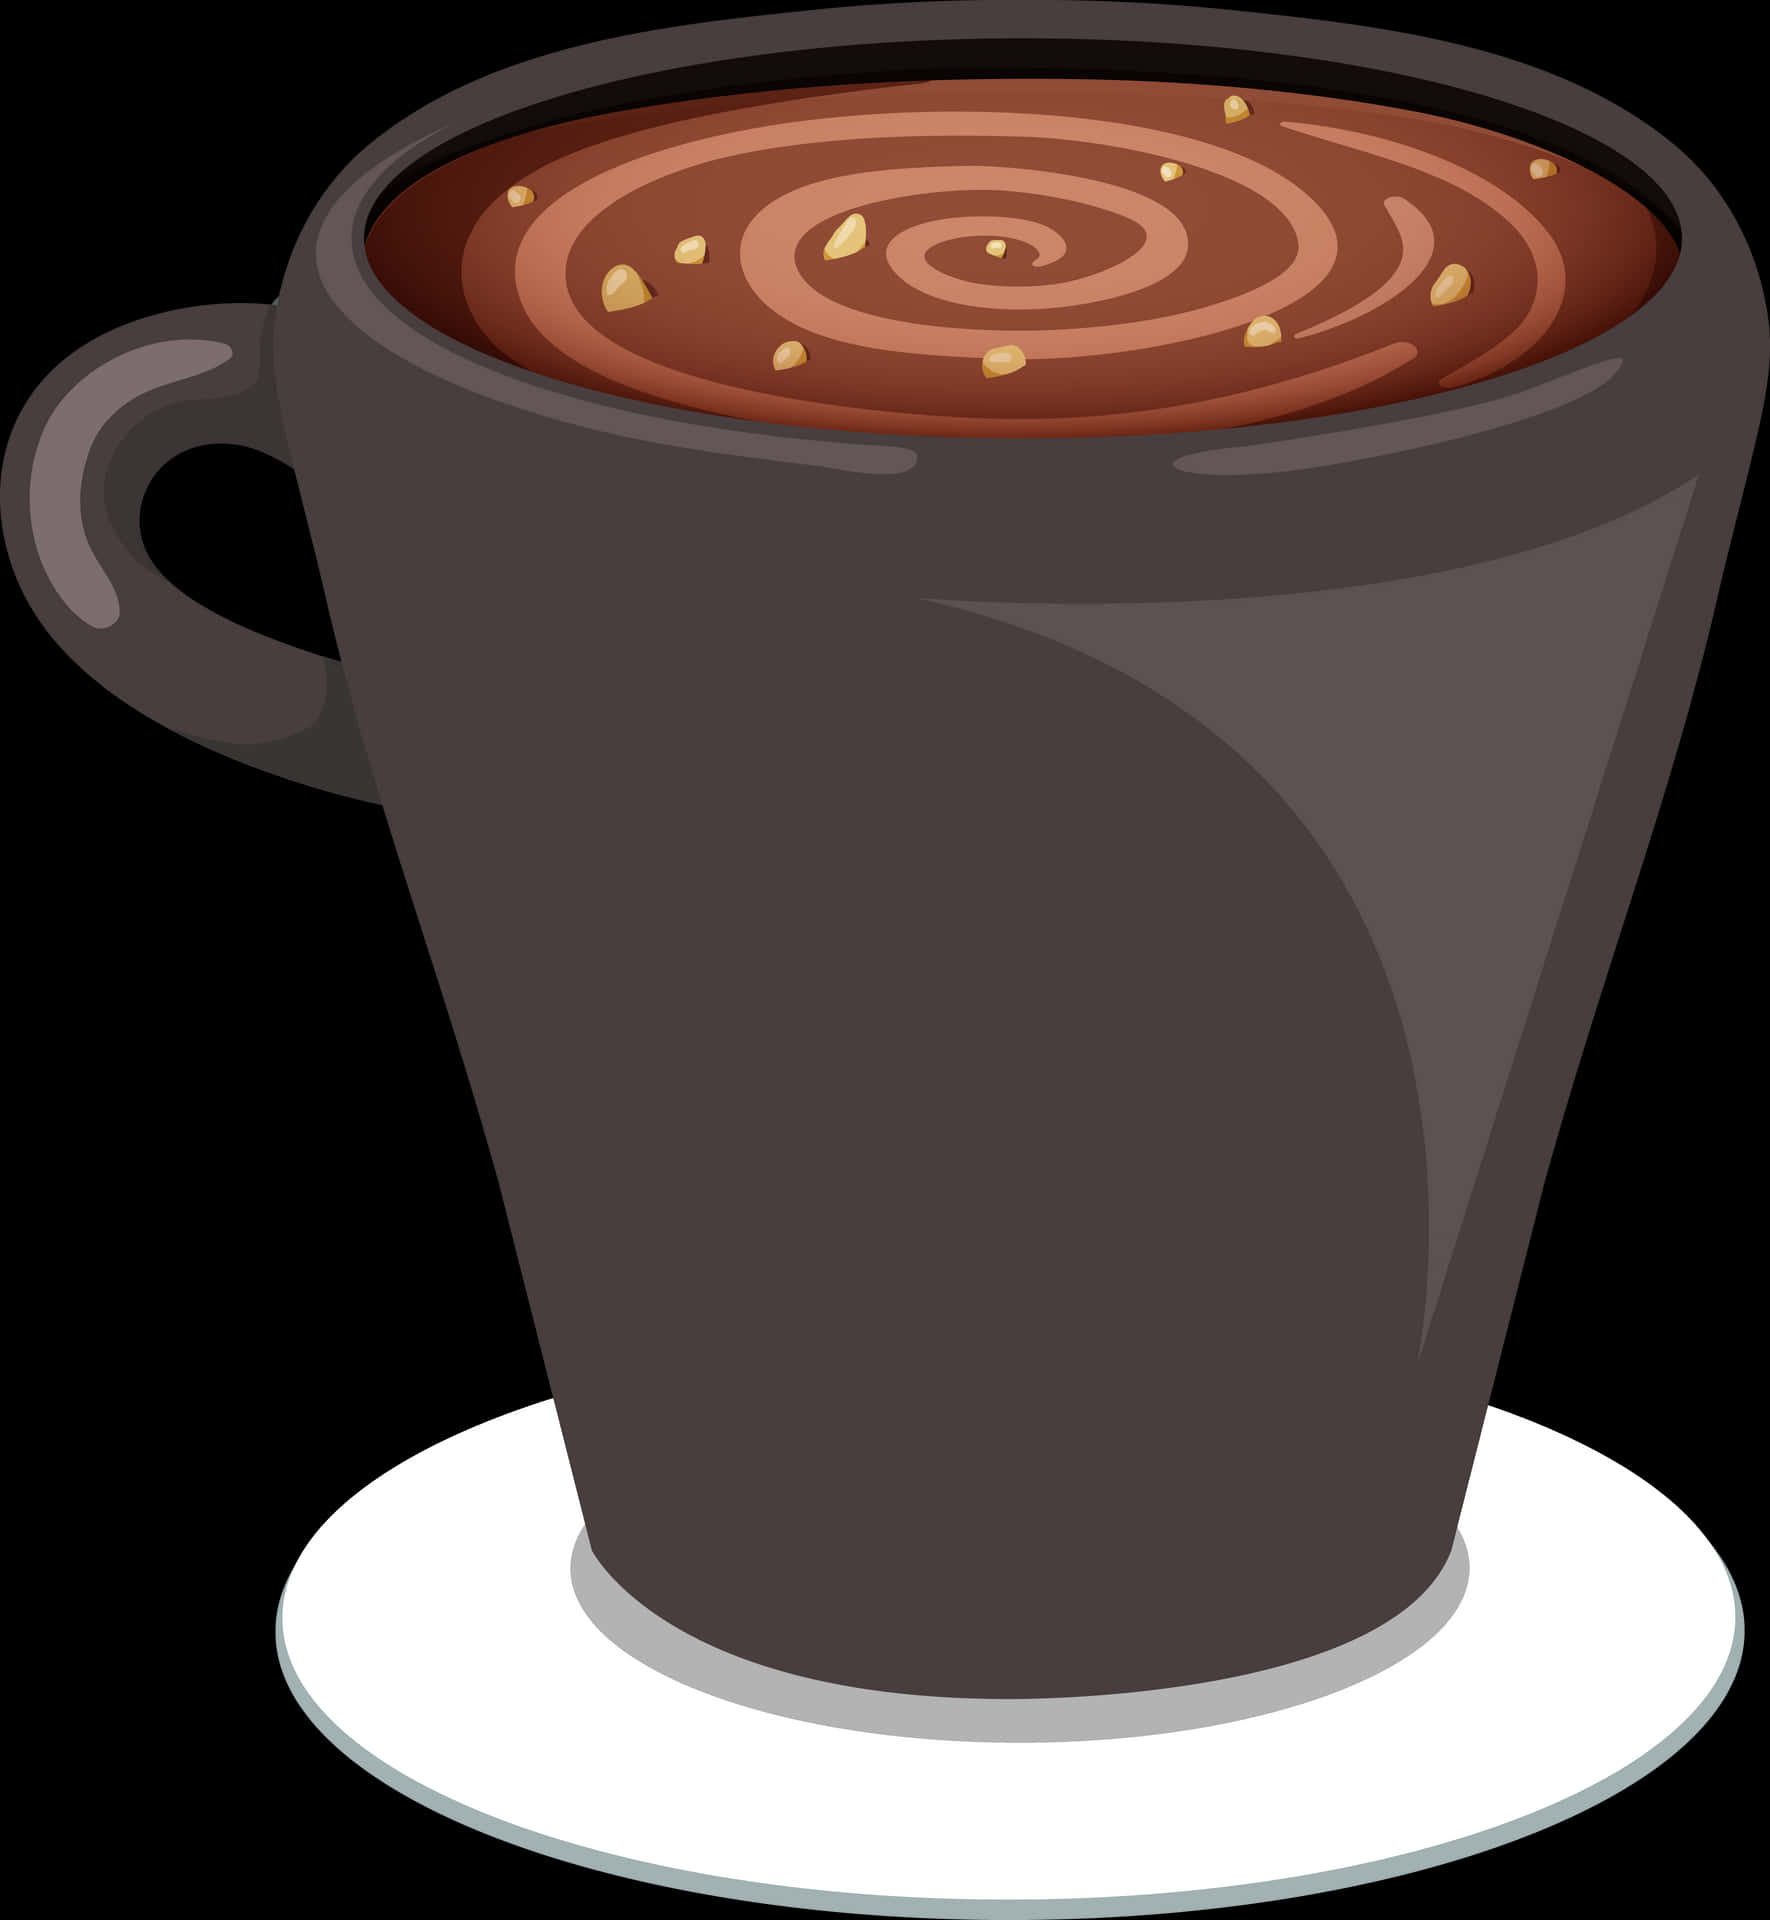 Steaming Coffee Cup Vector PNG